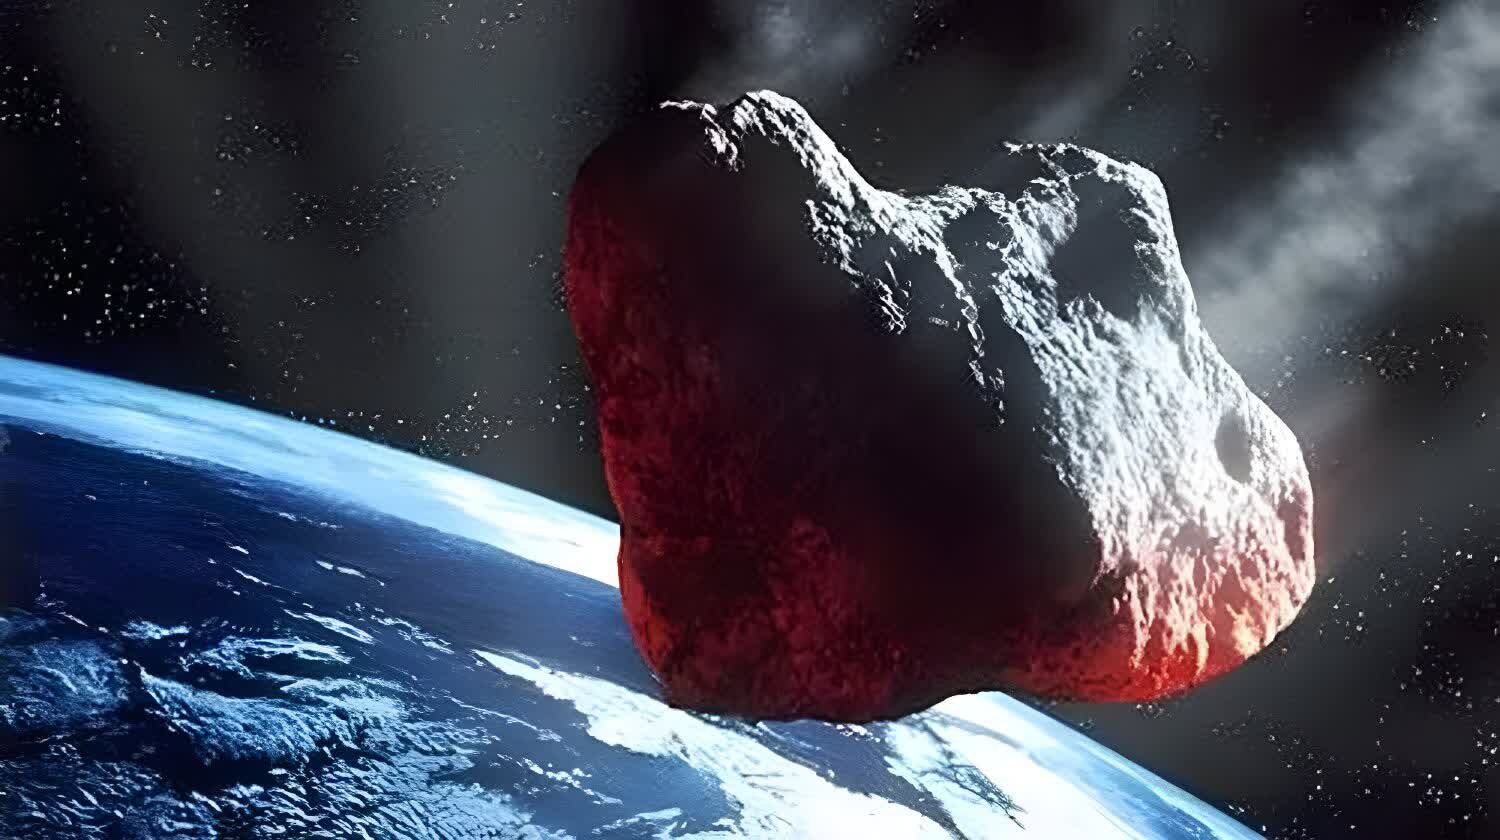 Pioneering study simulates using nuclear weapons for asteroid deflection